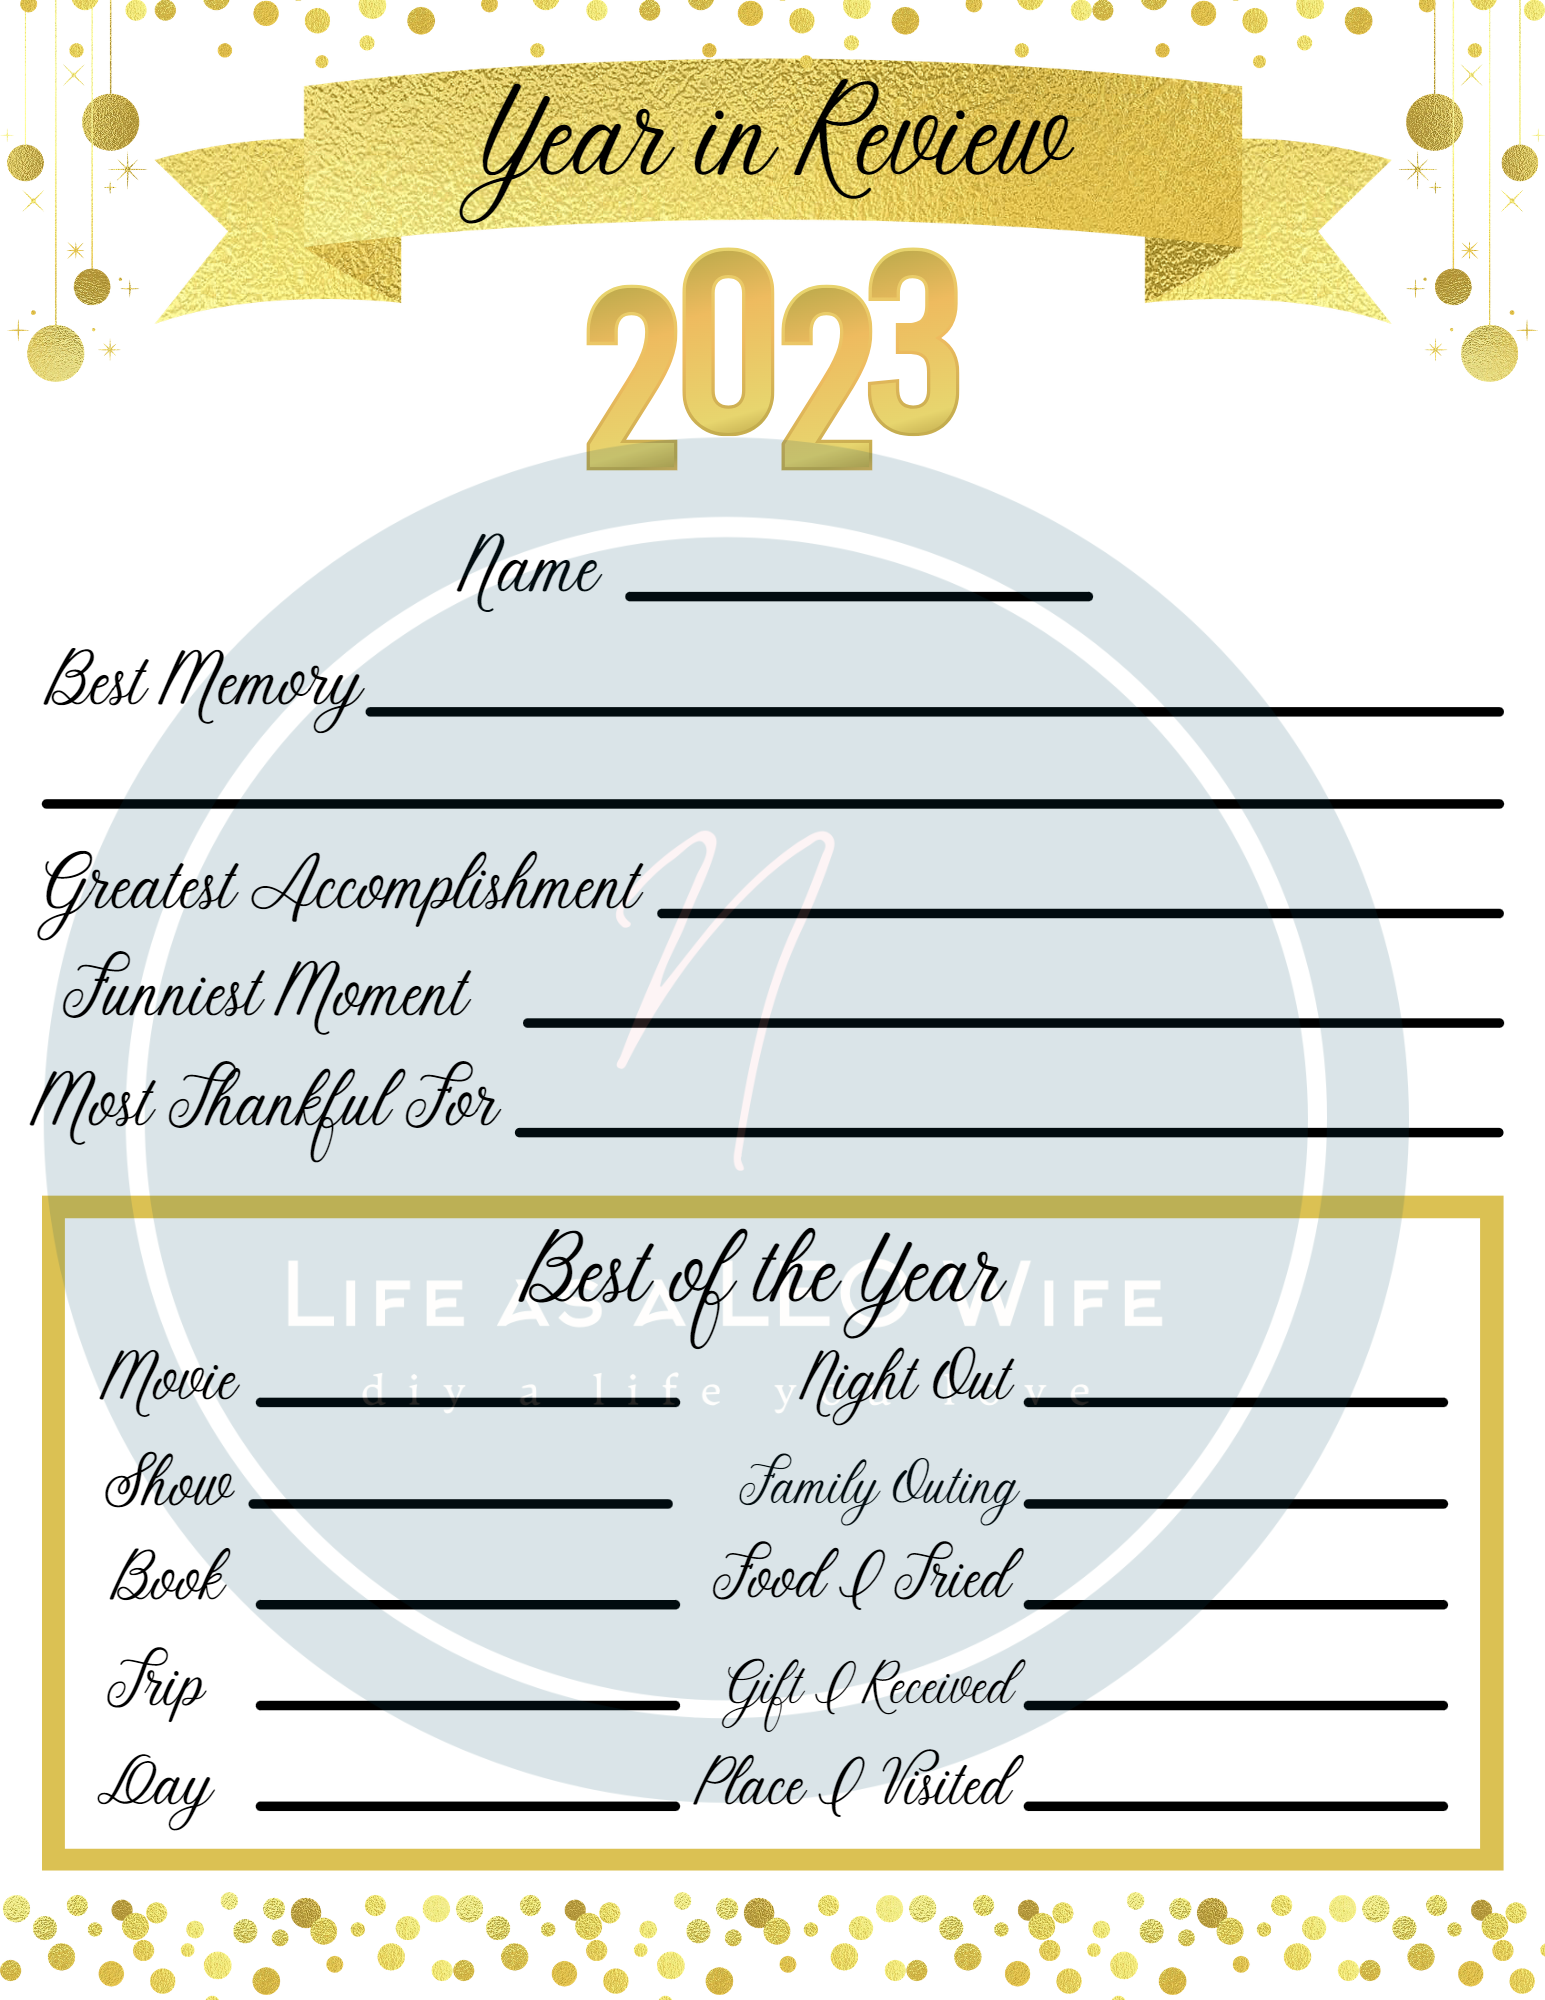 2022 Year in Review printable preview with logo overlay.